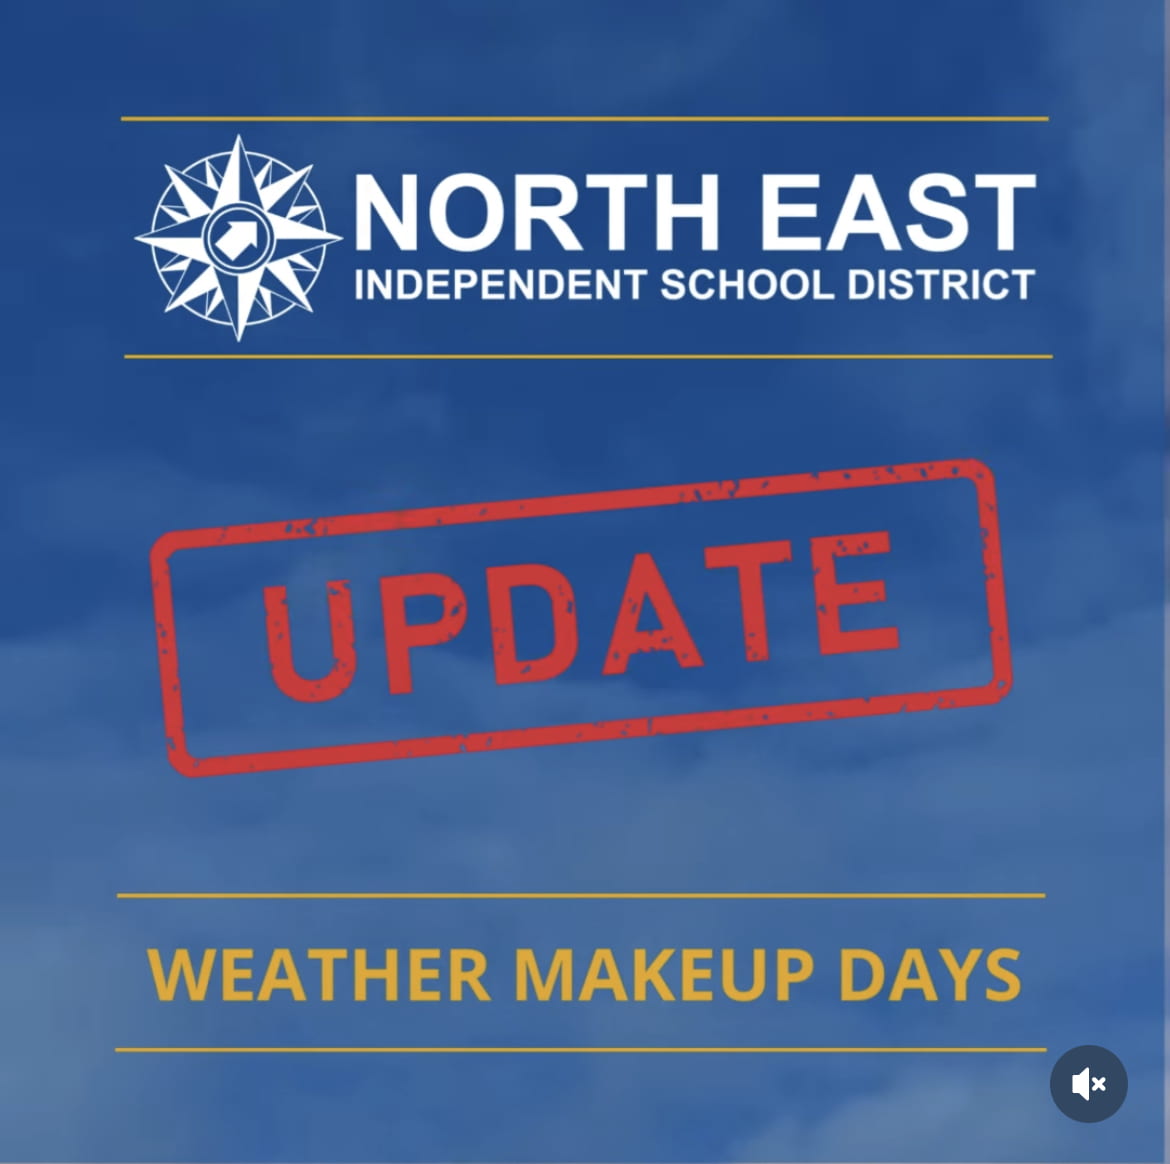 NEISD announced on Instagram an update on the bad weather makeup days. They used a small graphic with clouds in the background and red lettering that said update.